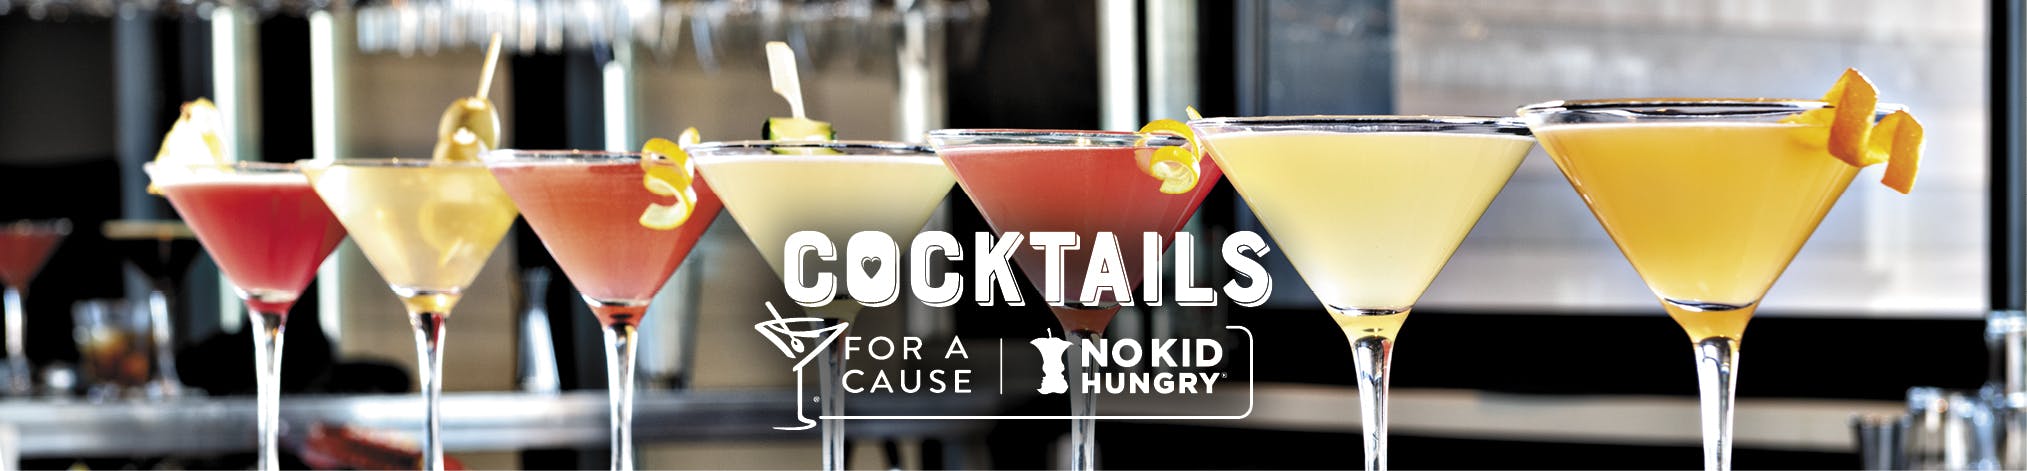 Cocktail for a cause Hero banner